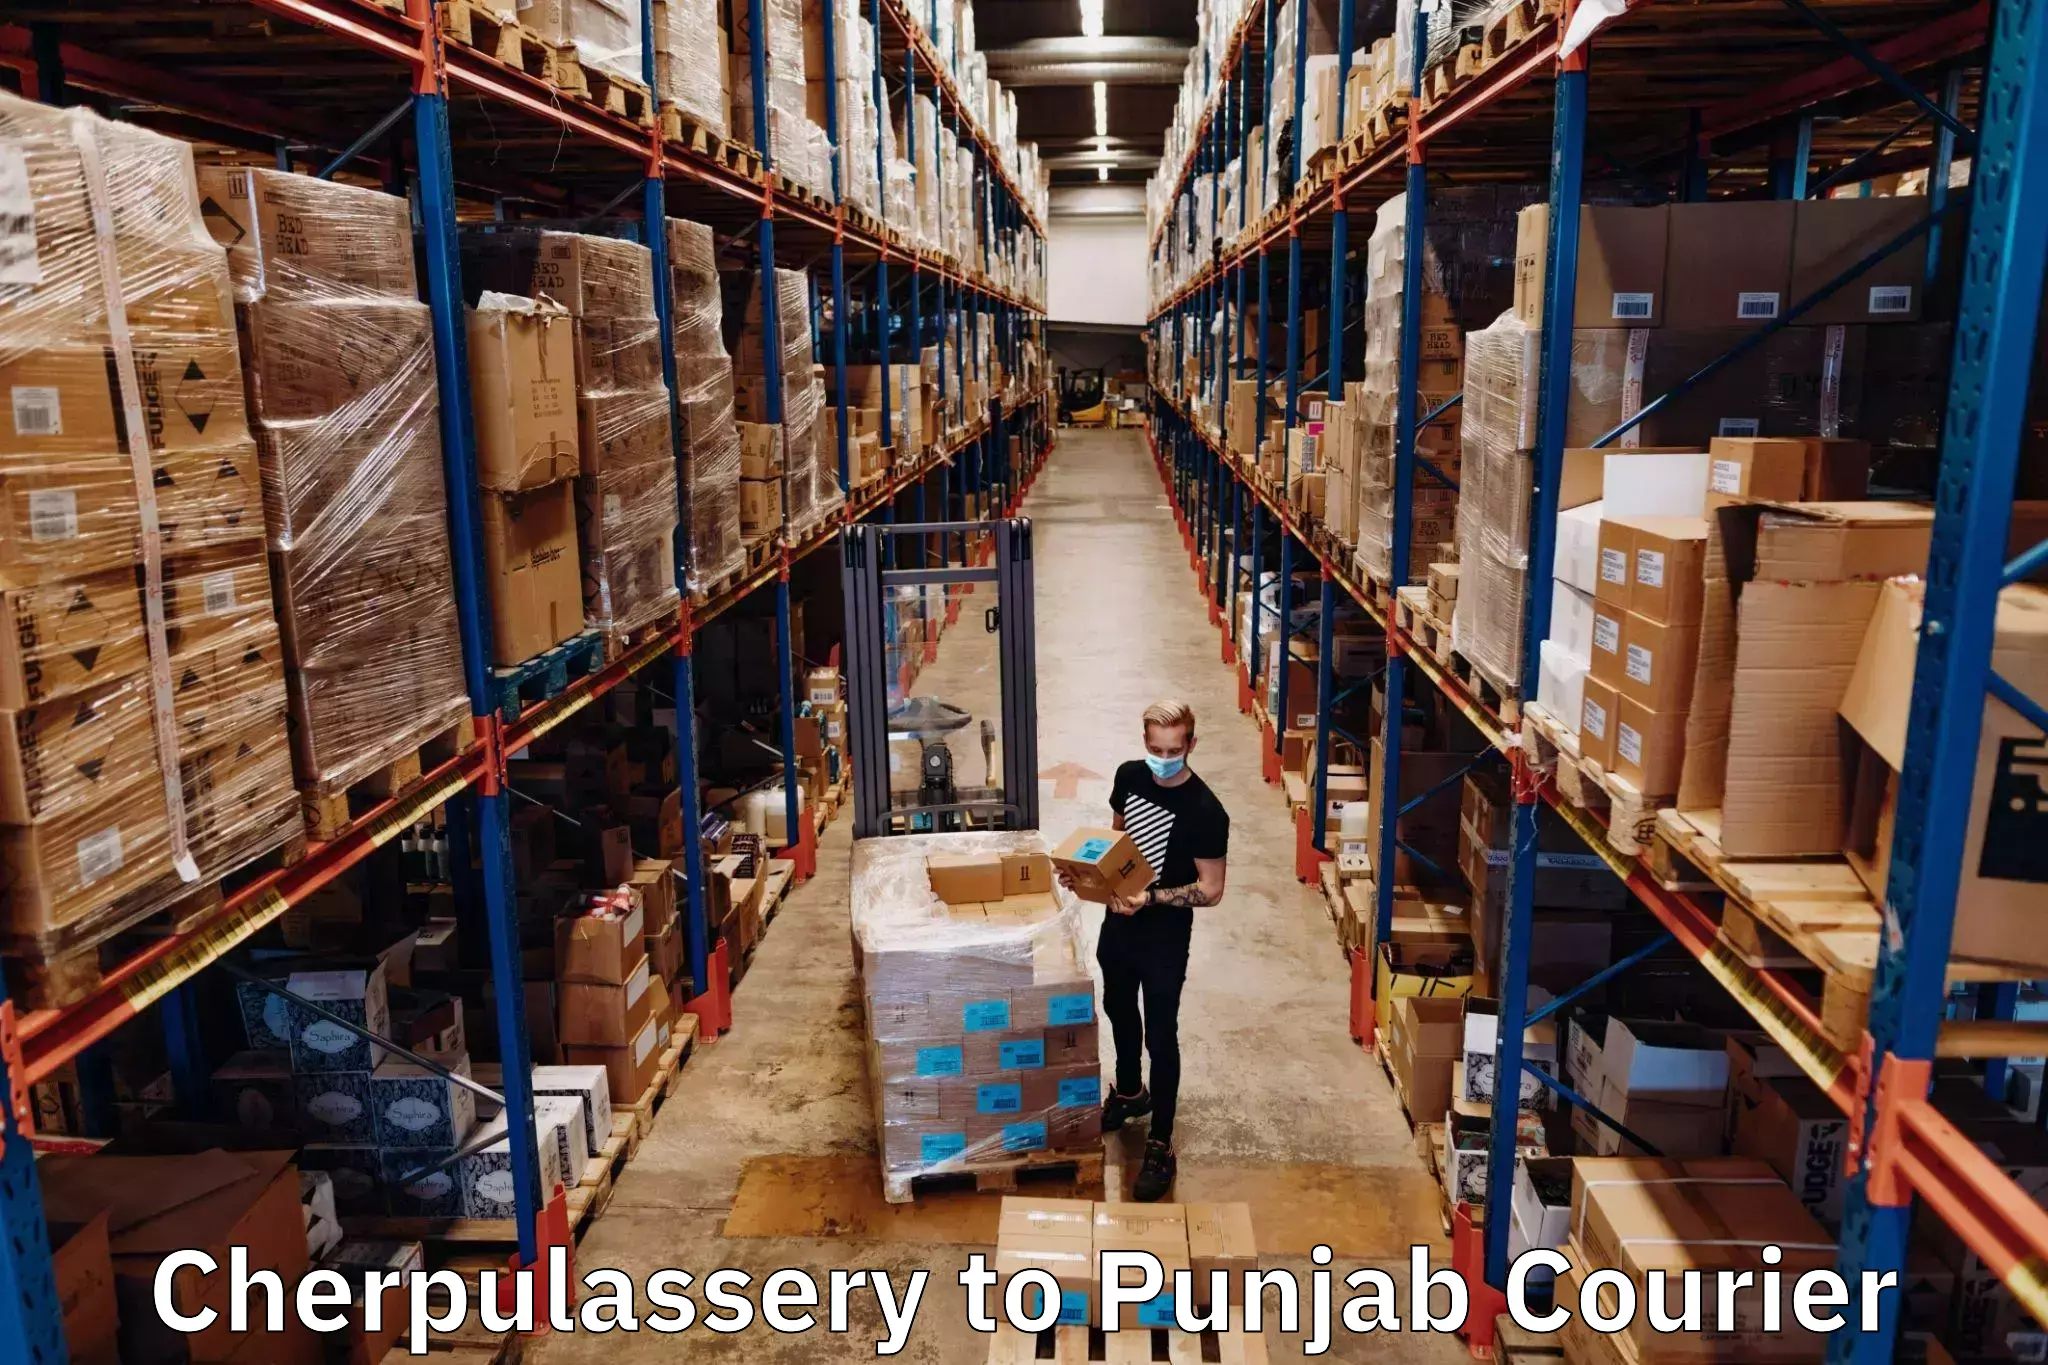 Corporate courier solutions Cherpulassery to Punjab